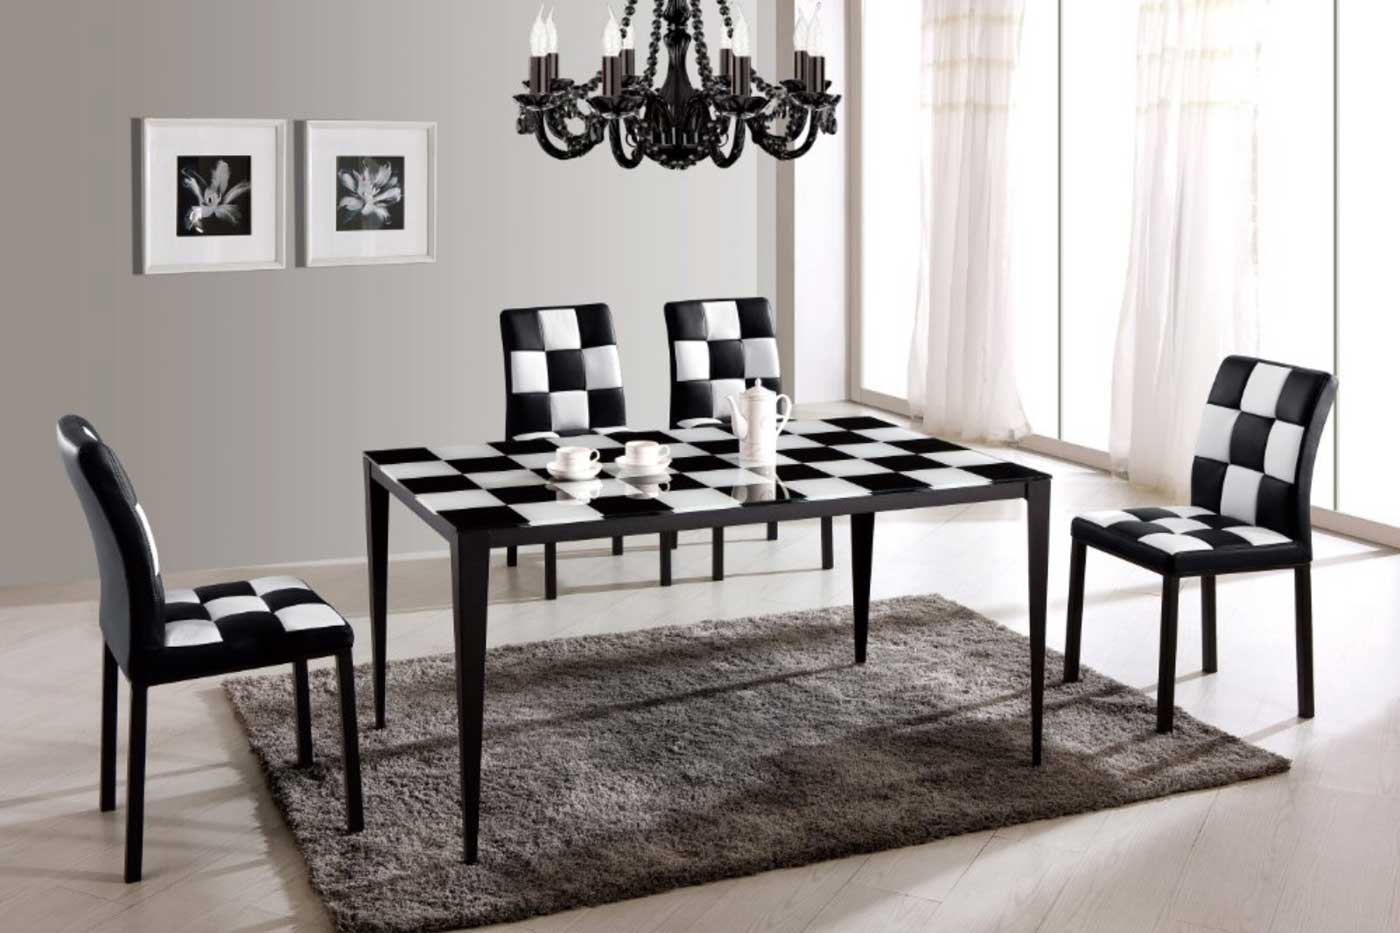 Black And Room Modern Black And White Dining Room Ideas With Stainless Steel Black And White Dinner Table For Small Spaces Design And Charming Grey Fur Rug Idea Also Interesting Traditional Black Chandelier Dining Room The Best Simple Dining Room Ideas